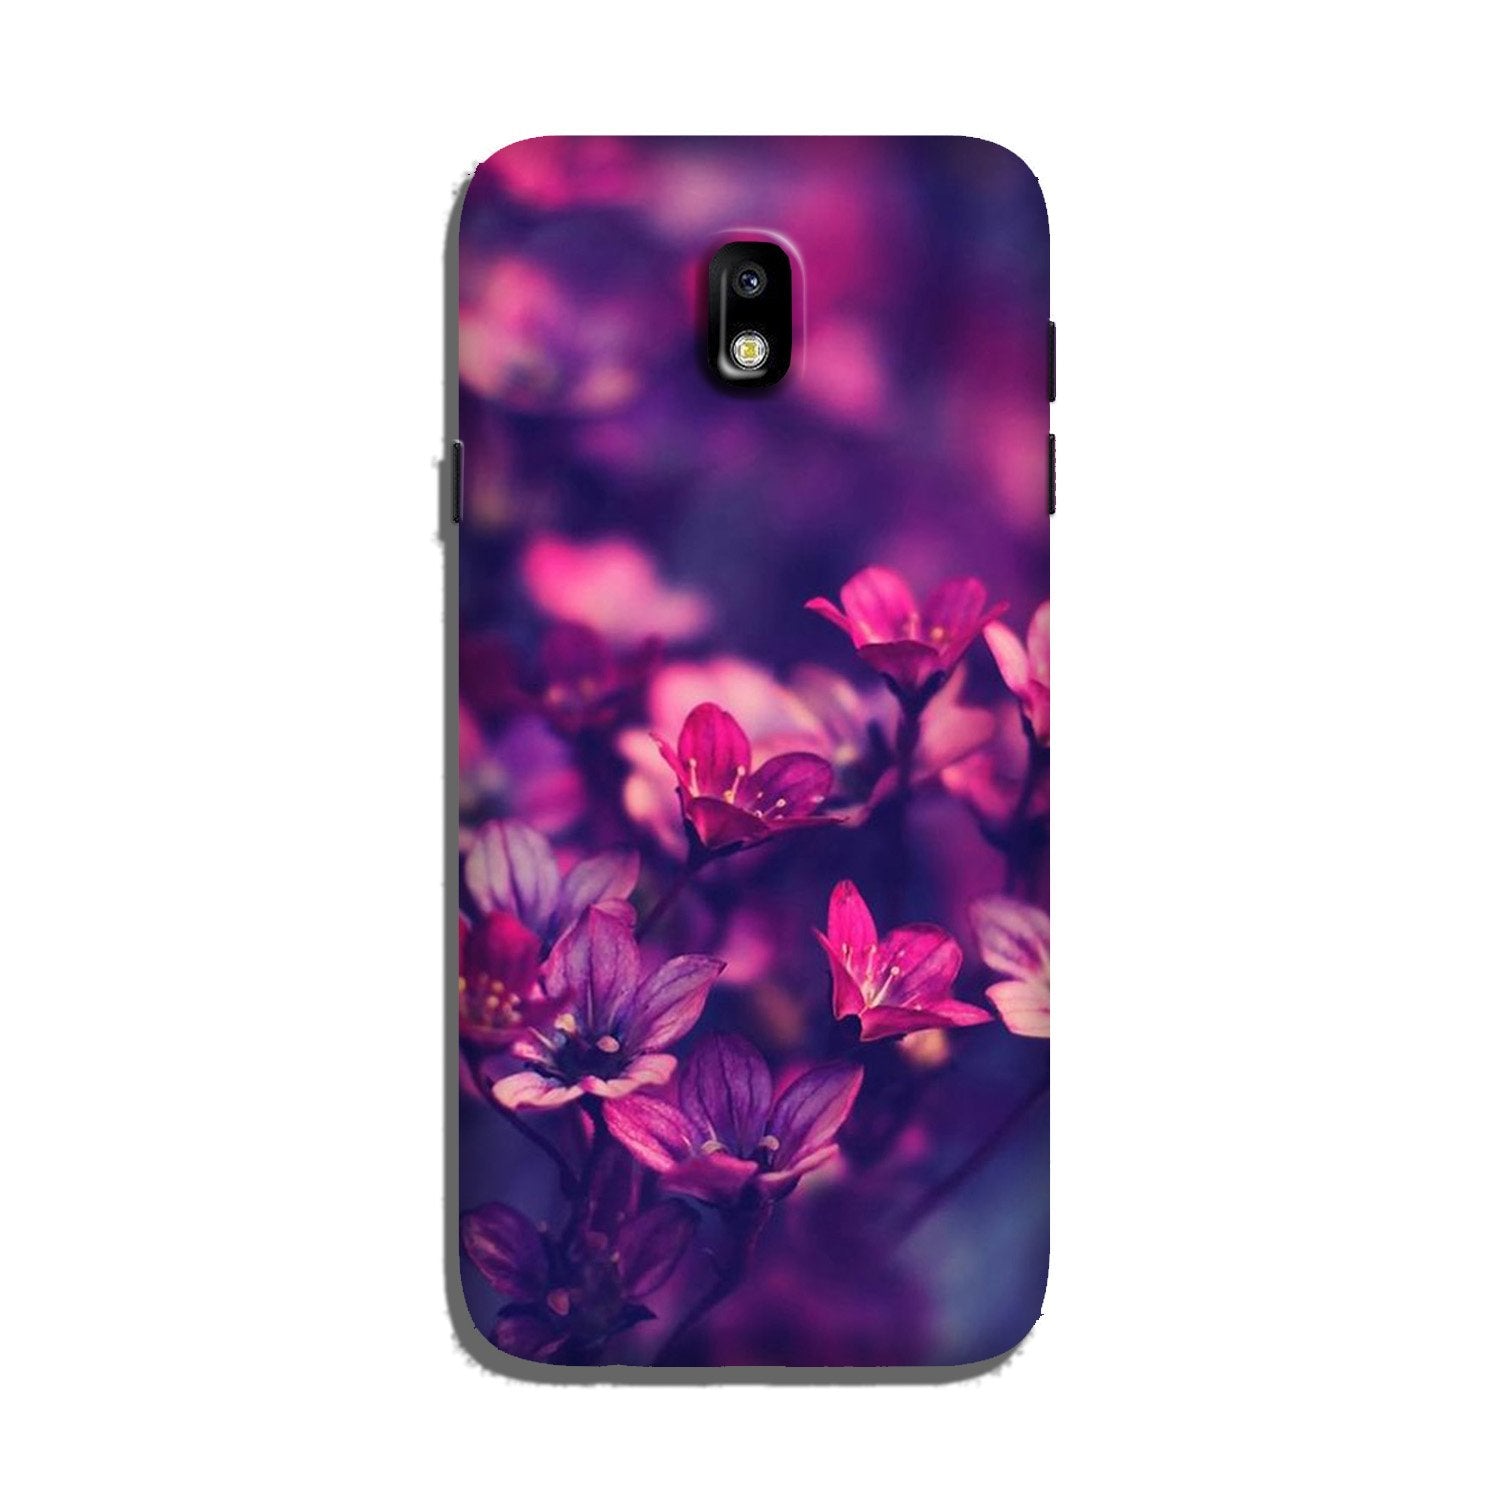 flowers Case for Galaxy J3 Pro